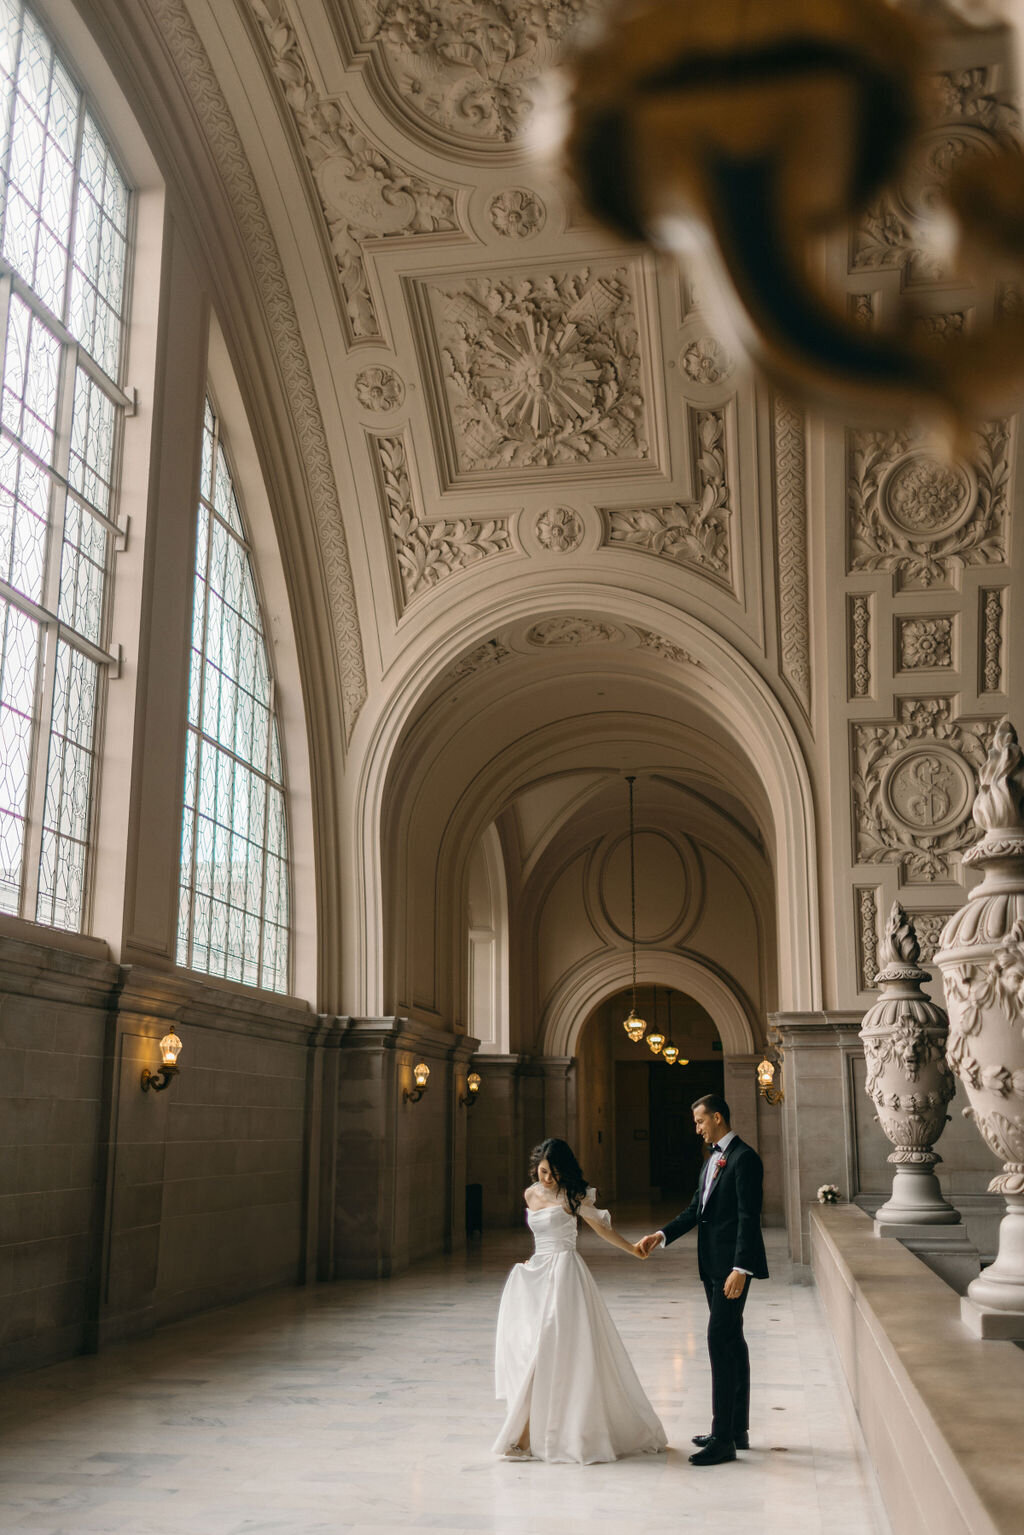 A bride and groom holding hands in a grand hall with ornate ceilings and large windows in San Francisco City Hall, showcasing intricate architectural details.